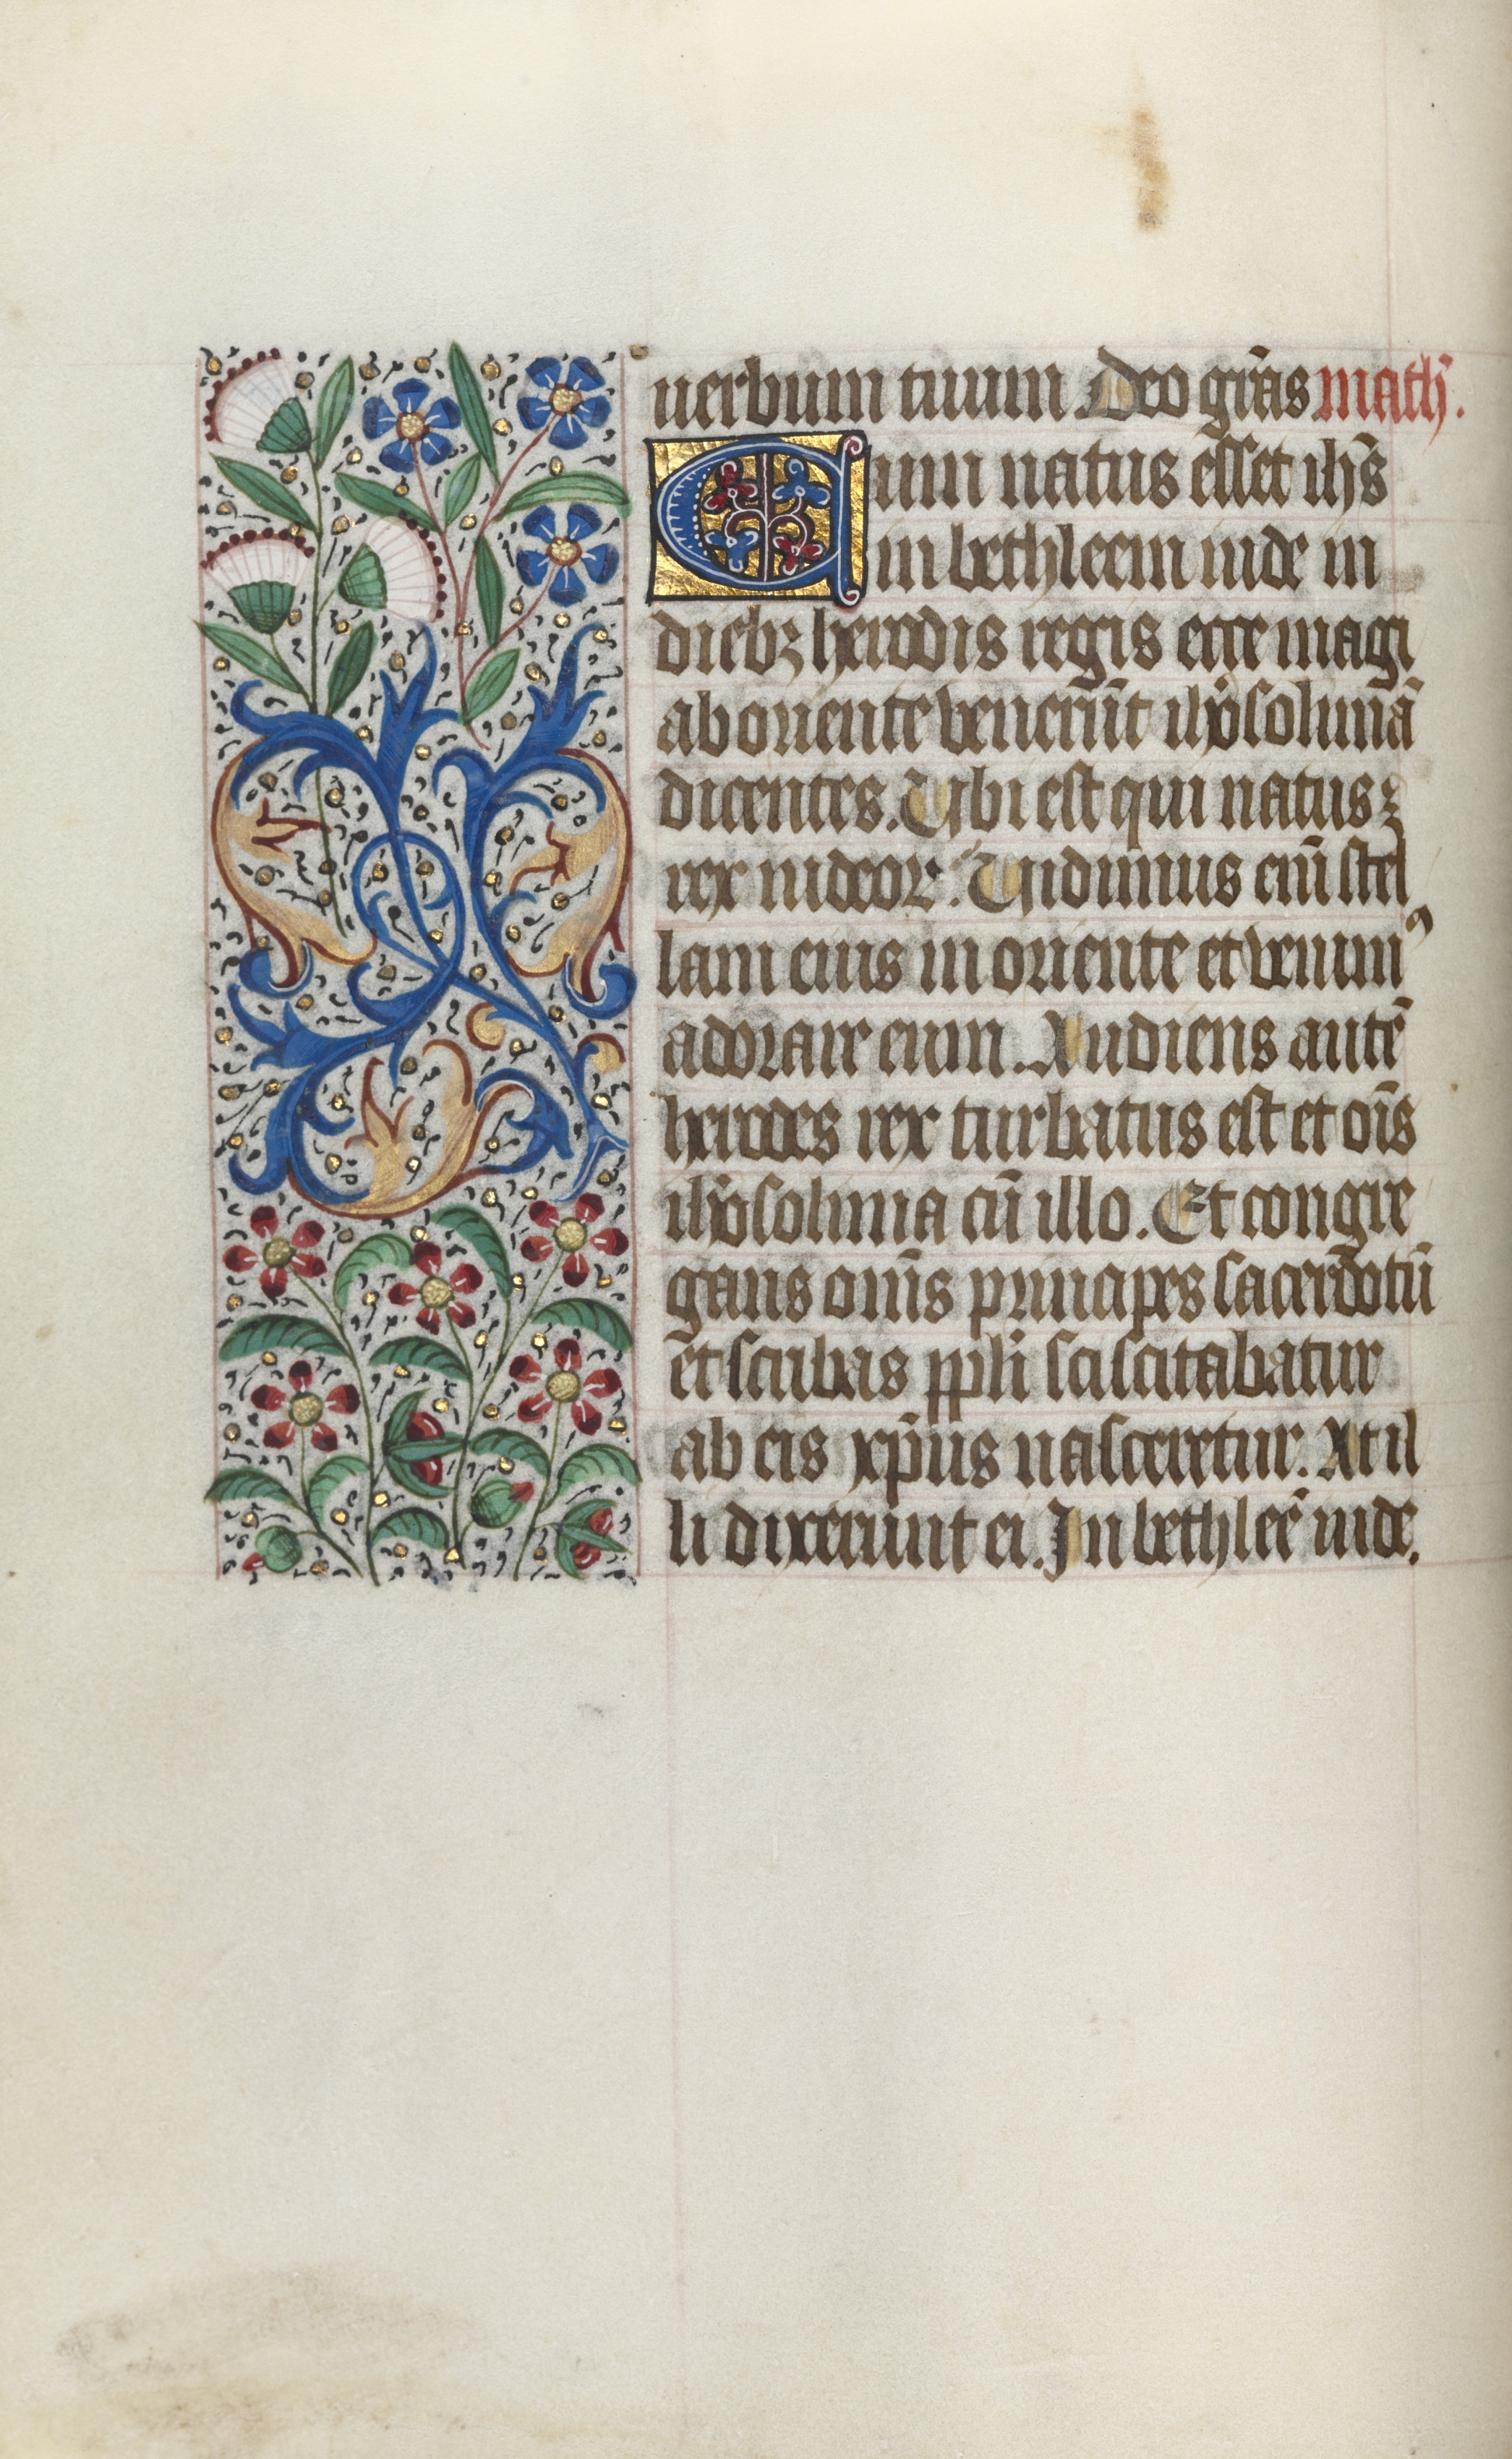 Book of Hours (Use of Rouen): fol. 16v, Opening of the Gospel of Mathew